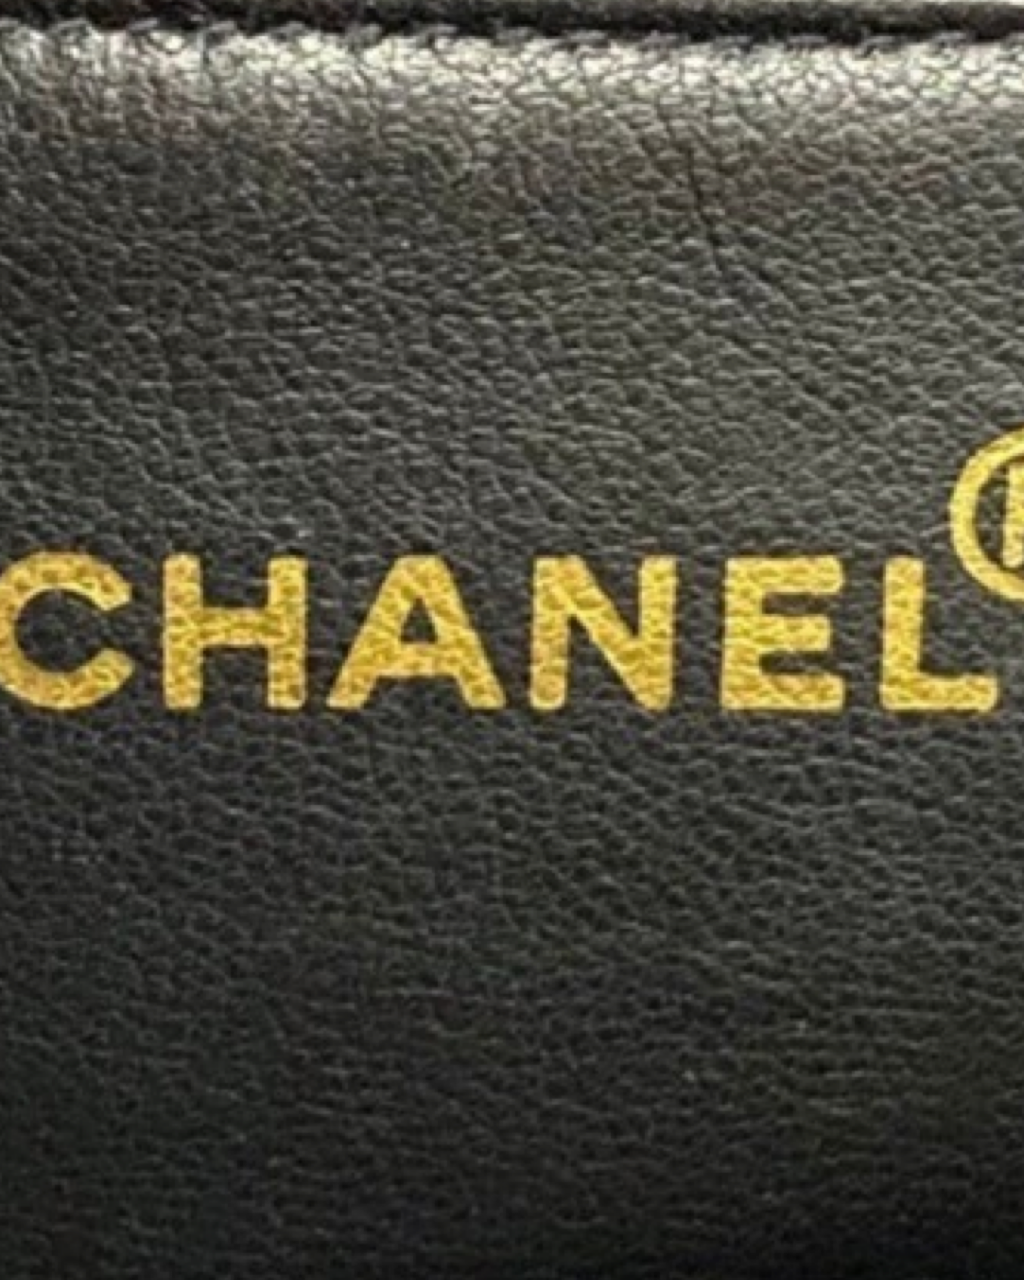 Chanel Double Sided Flap Bag